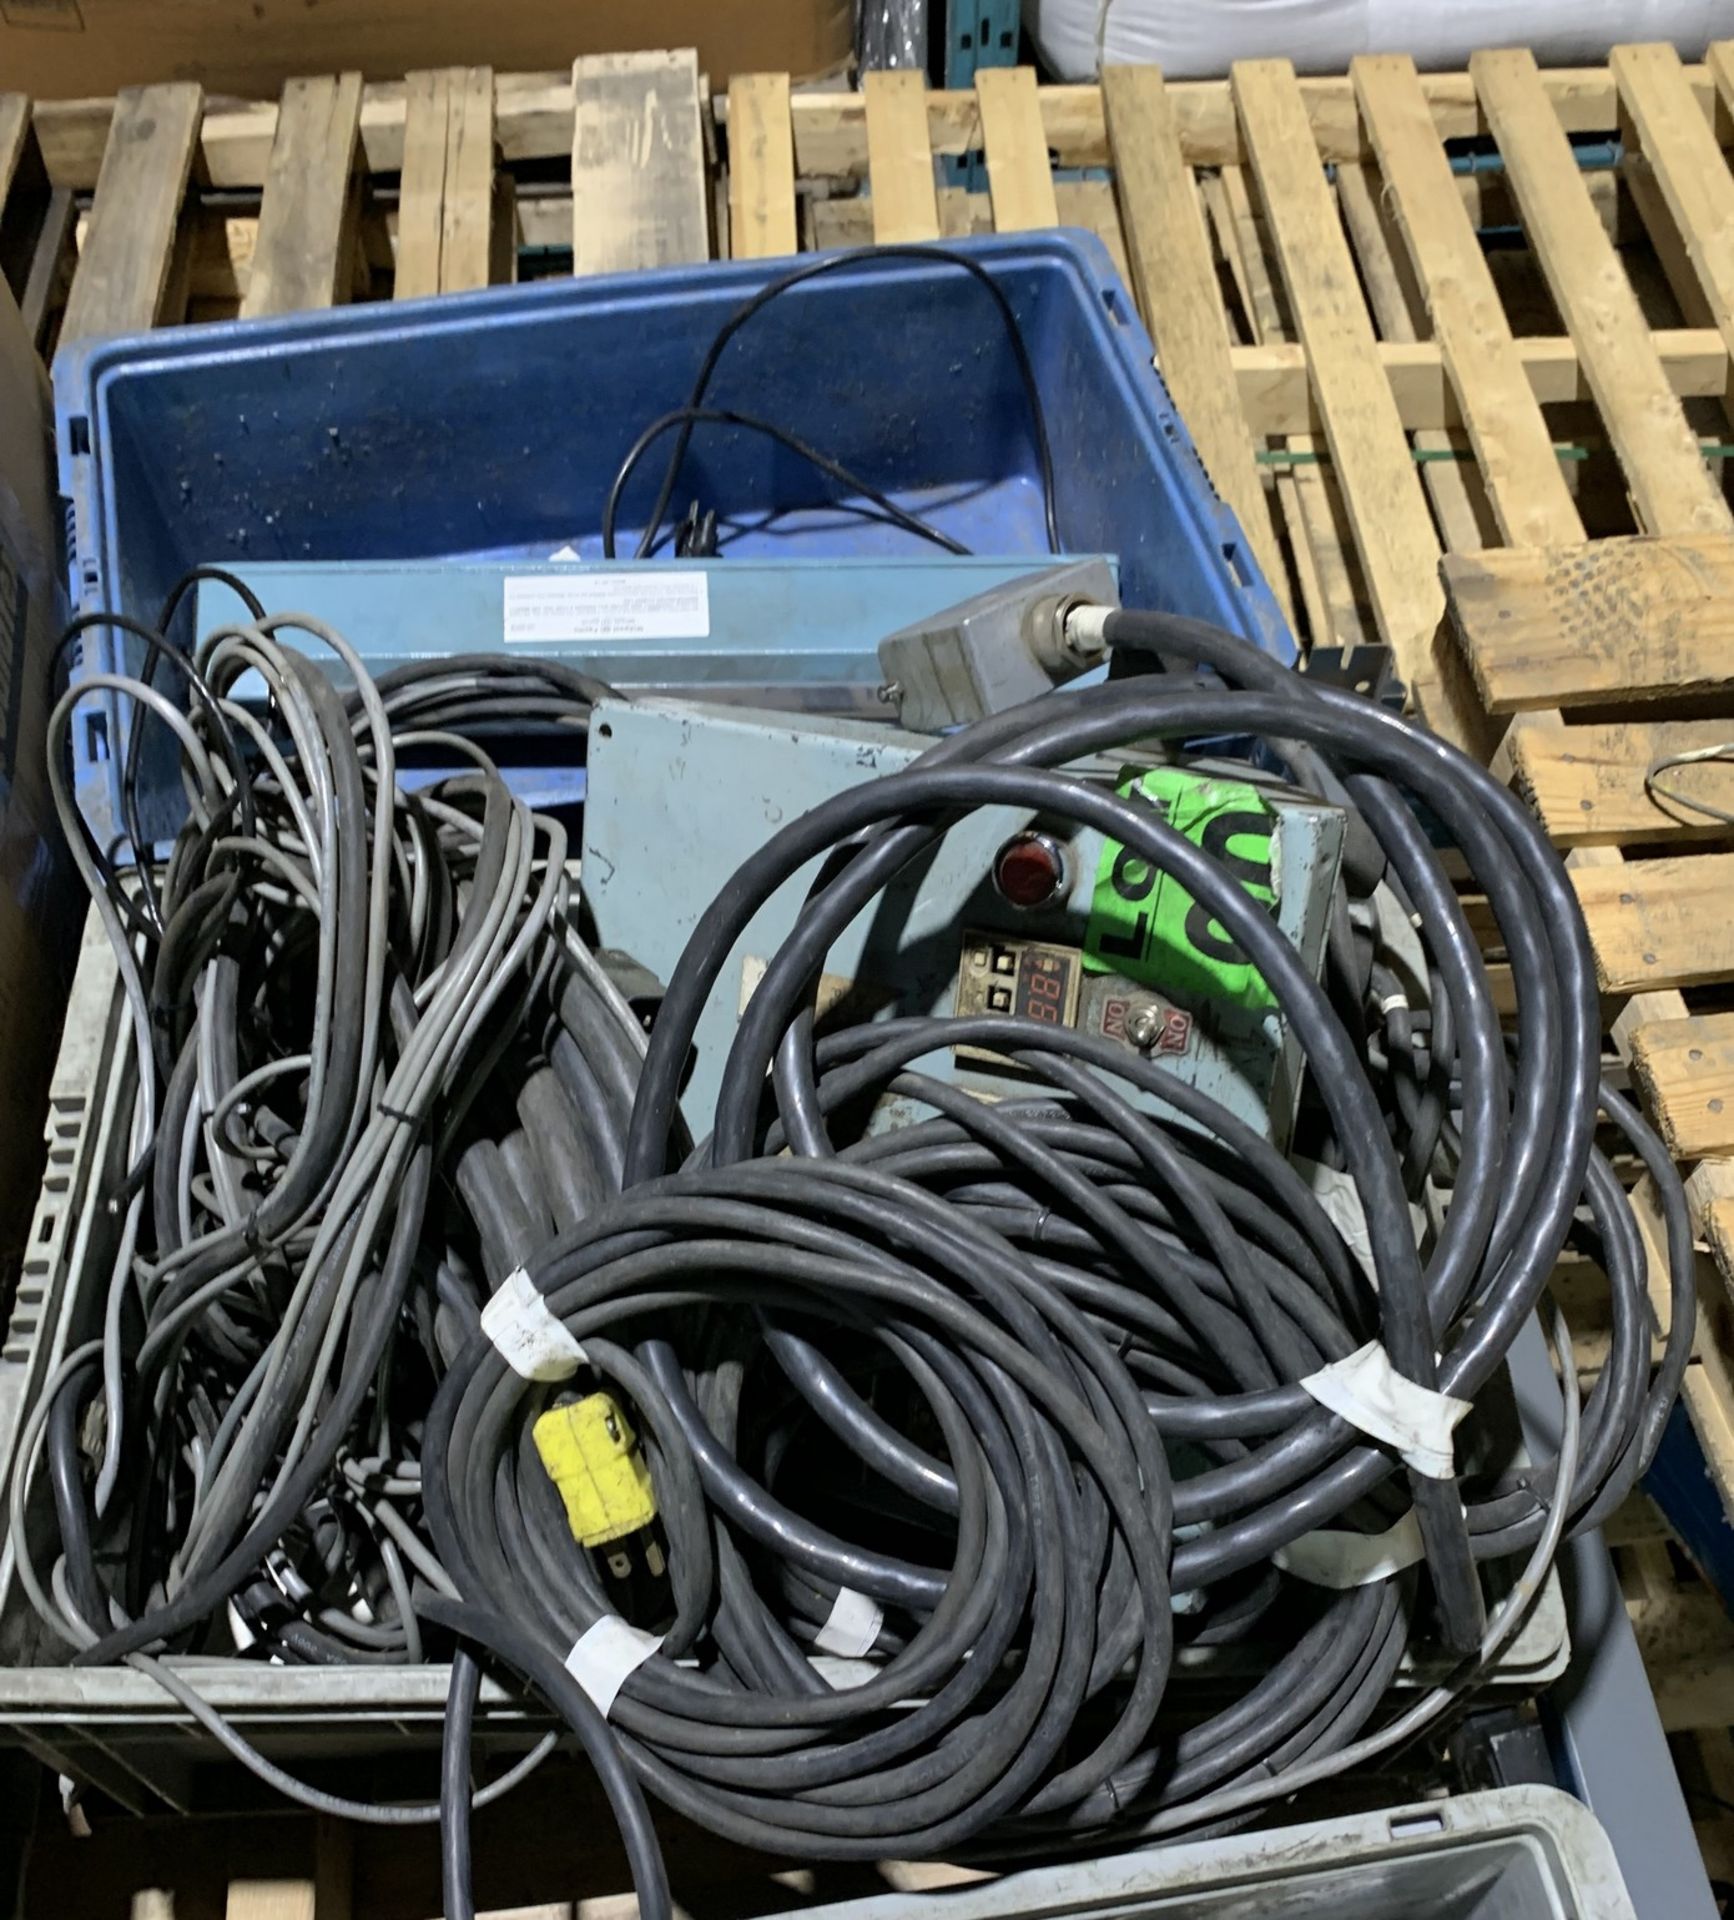 BIN OF WIRES - Image 2 of 3